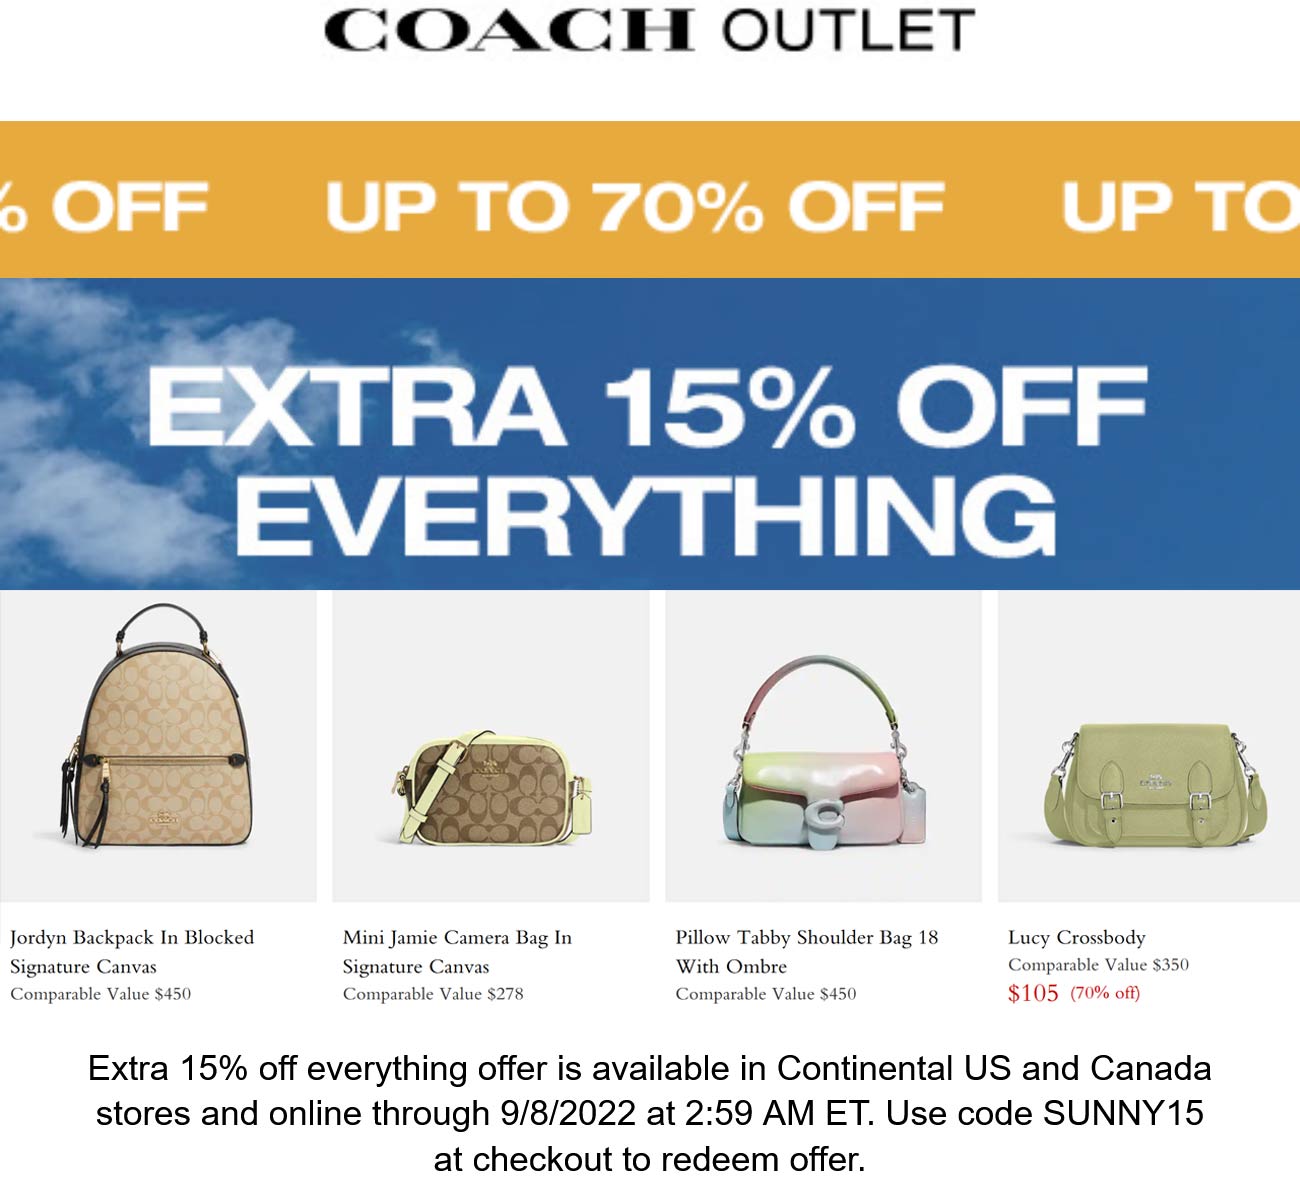 Coach Outlet stores Coupon  Extra 15% off everything at Coach Outlet via promo code SUNNY15 #coachoutlet 